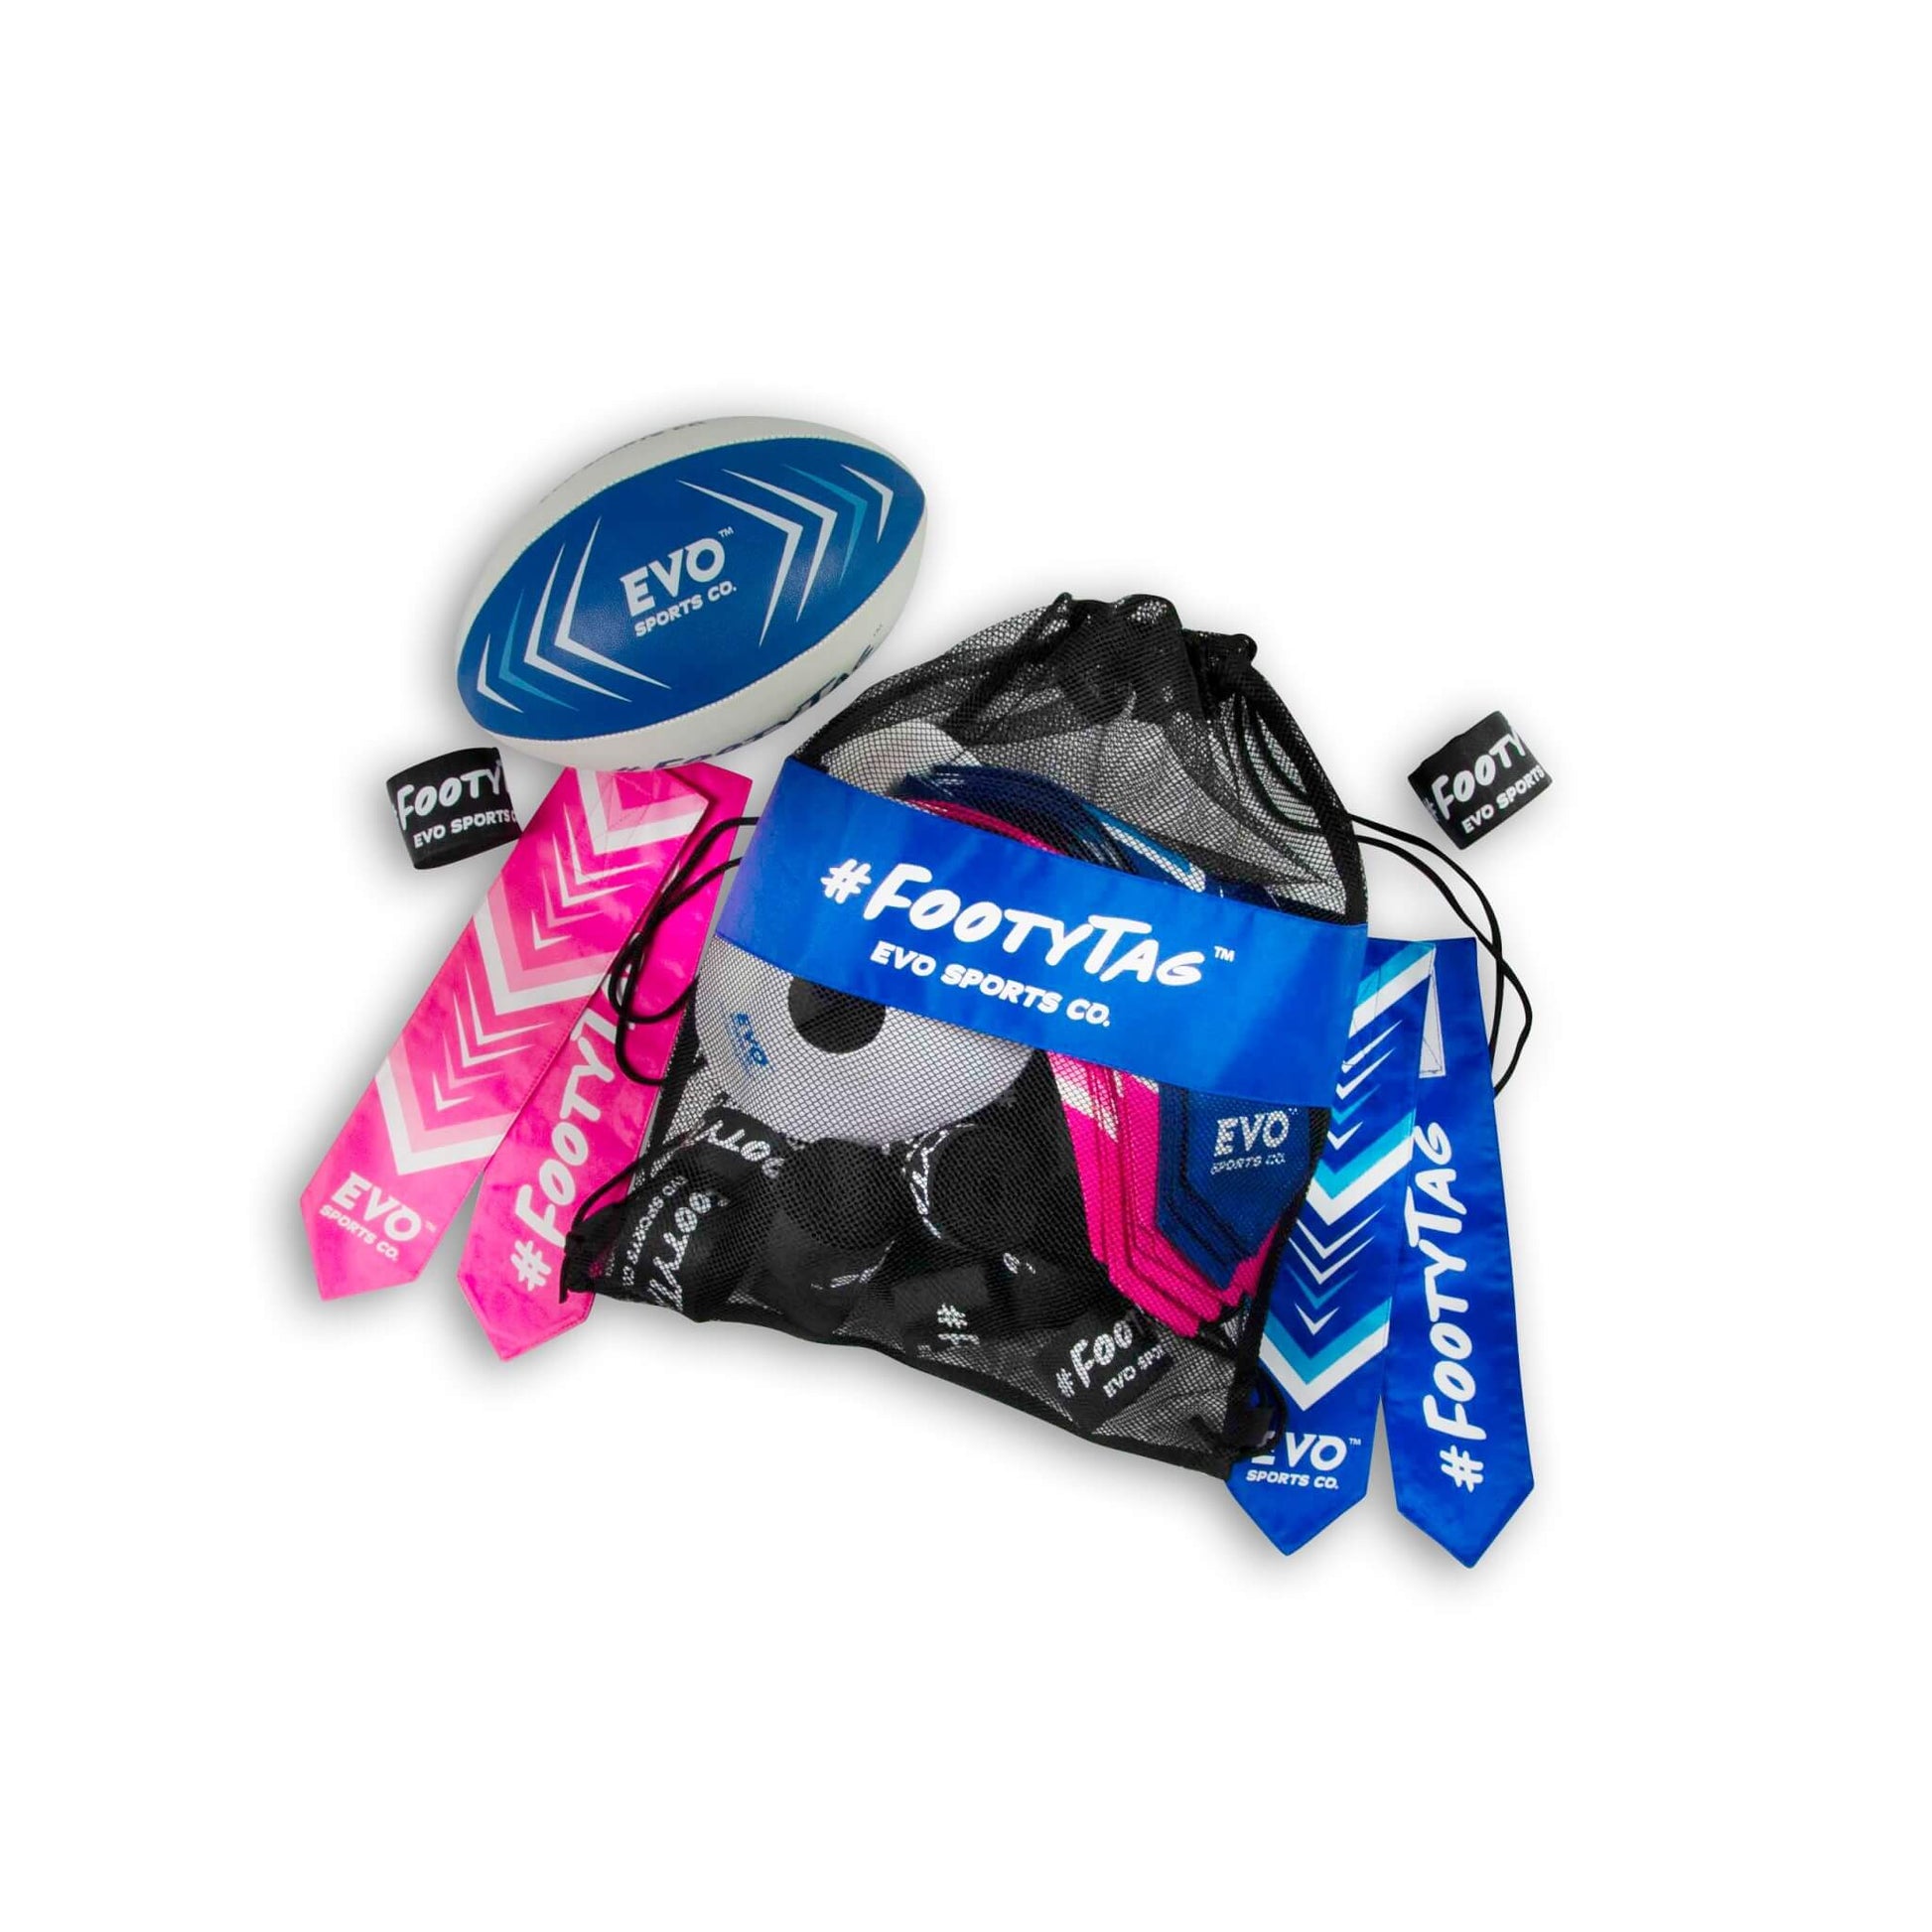 Footy Tag - Adults Rugby Tag Kit - 20 Players - Evo Sports Co